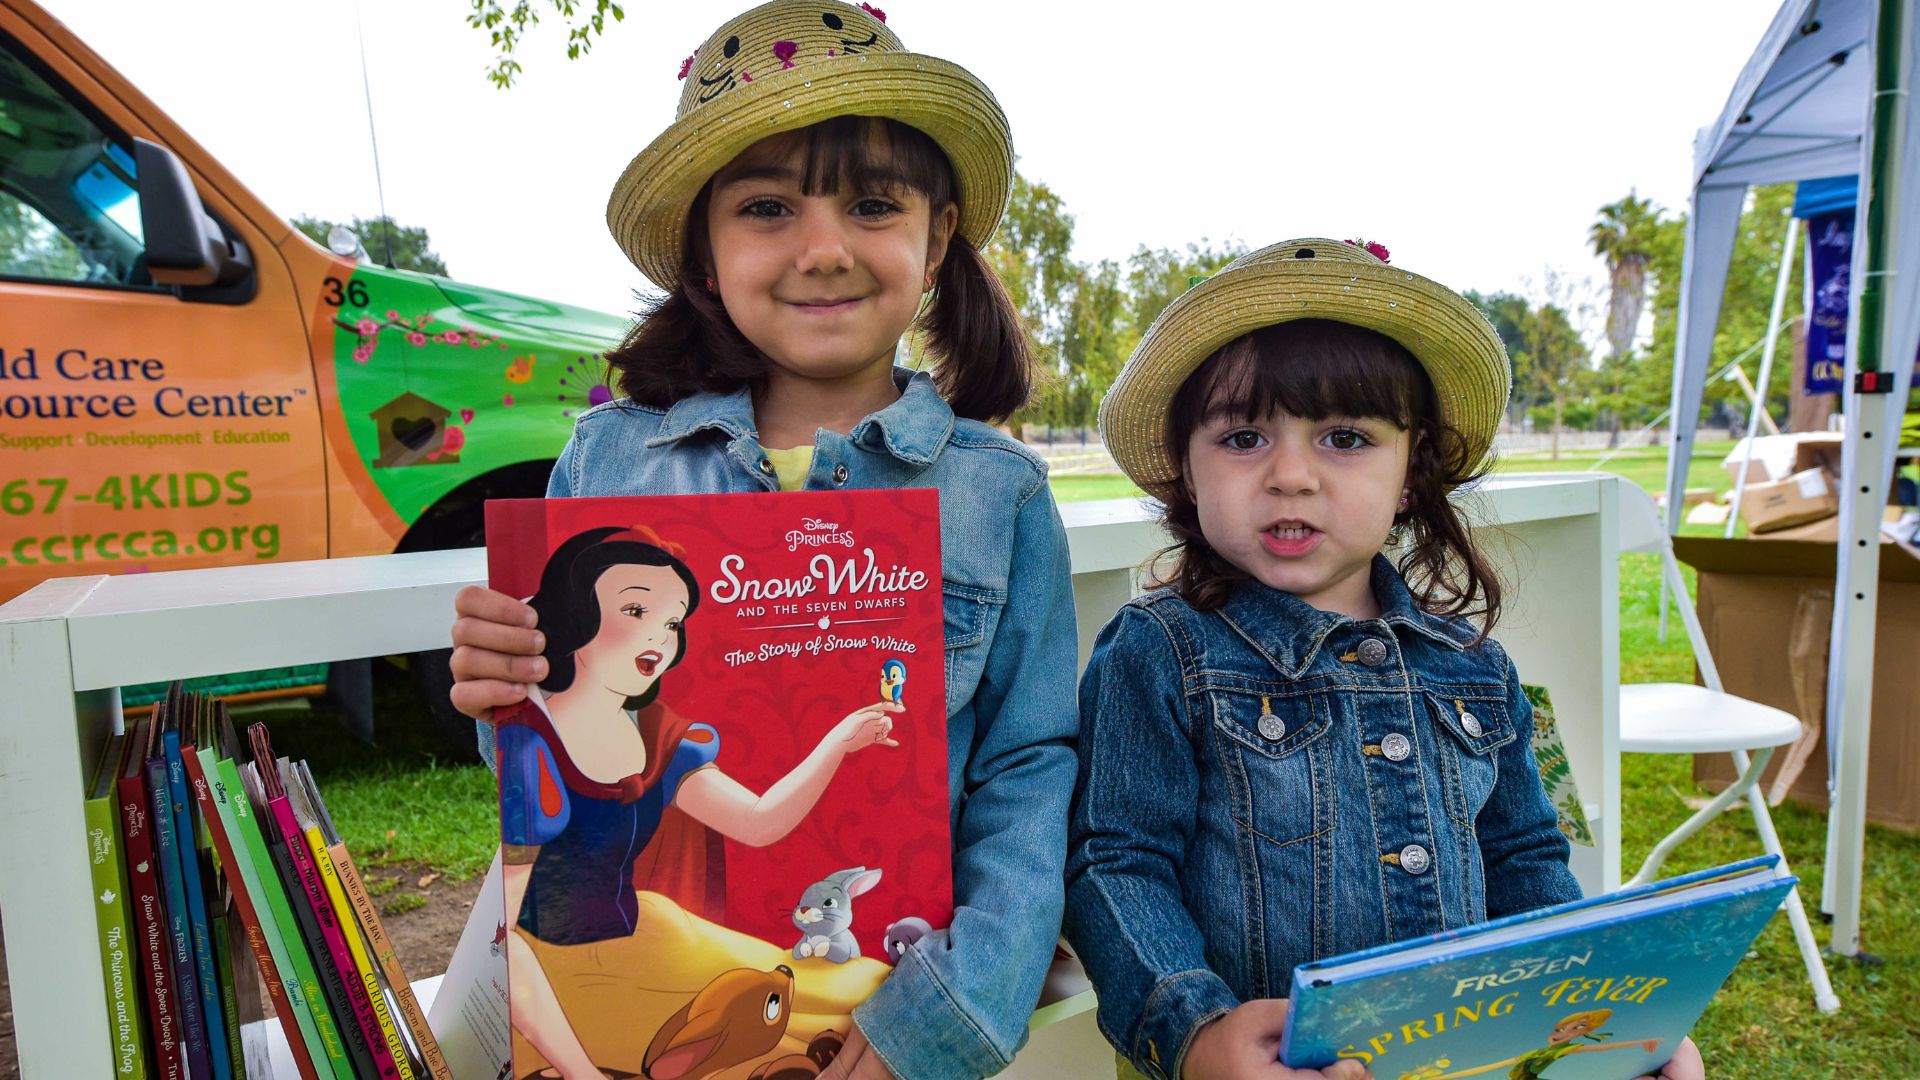 An image from CCRC’s Annabelle Godwin Play Day with two sisters each holding a book (Snow White, and Frozen) that they got to take home for free at our family play day.